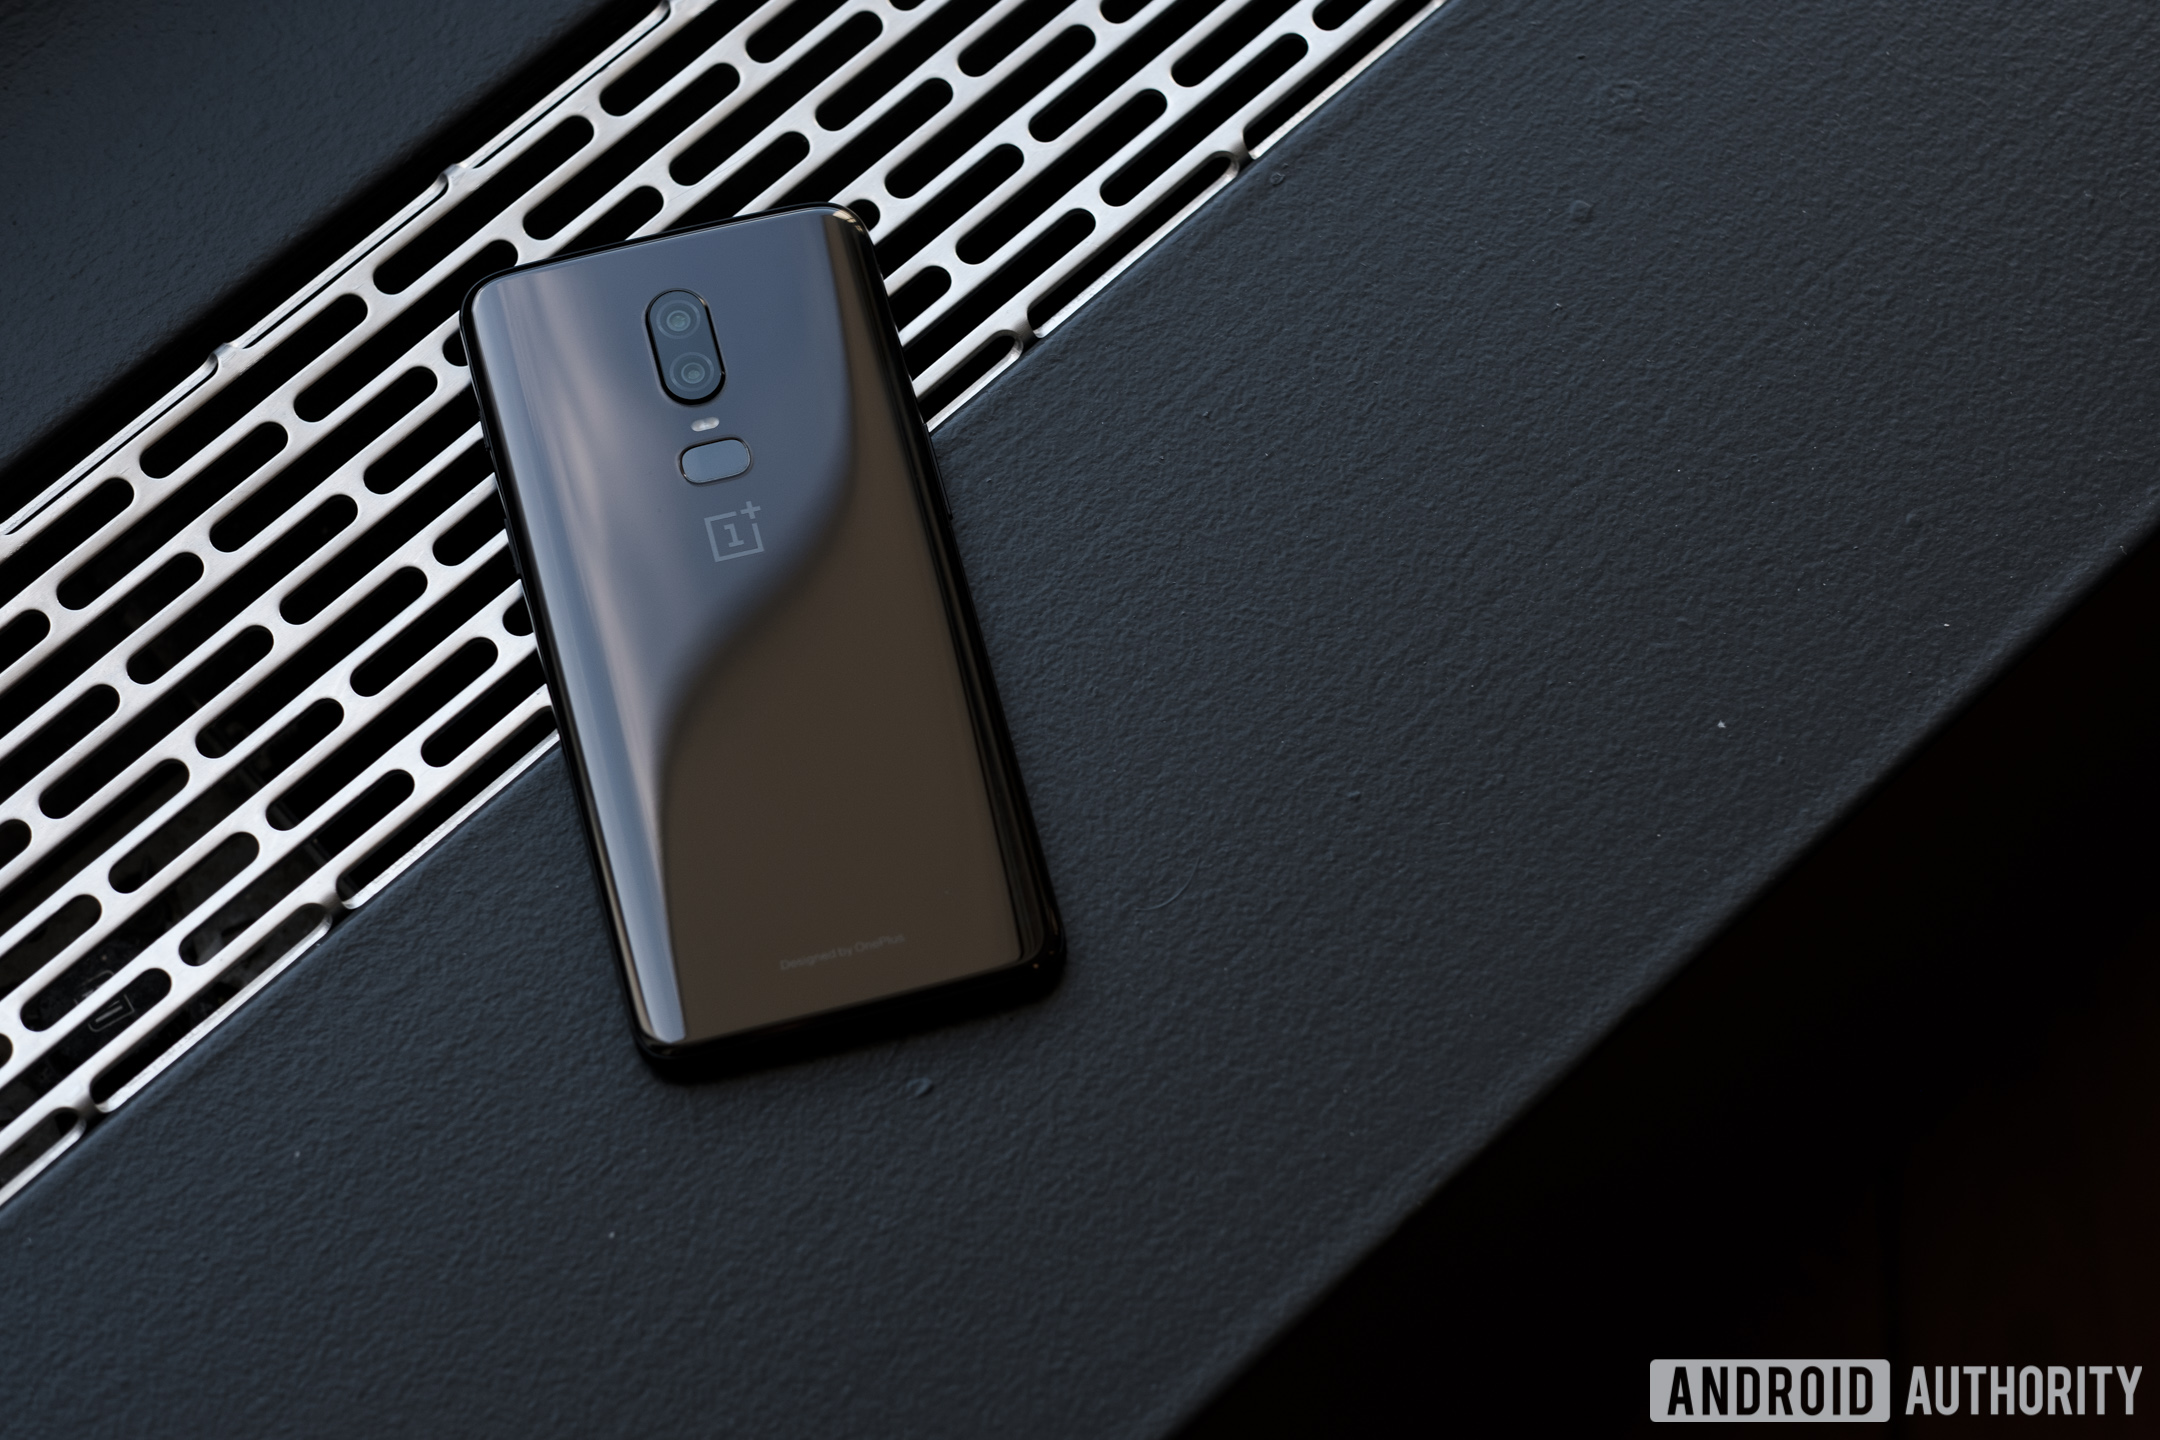 The OnePlus 6 smartphone in black lying face-down against metal.